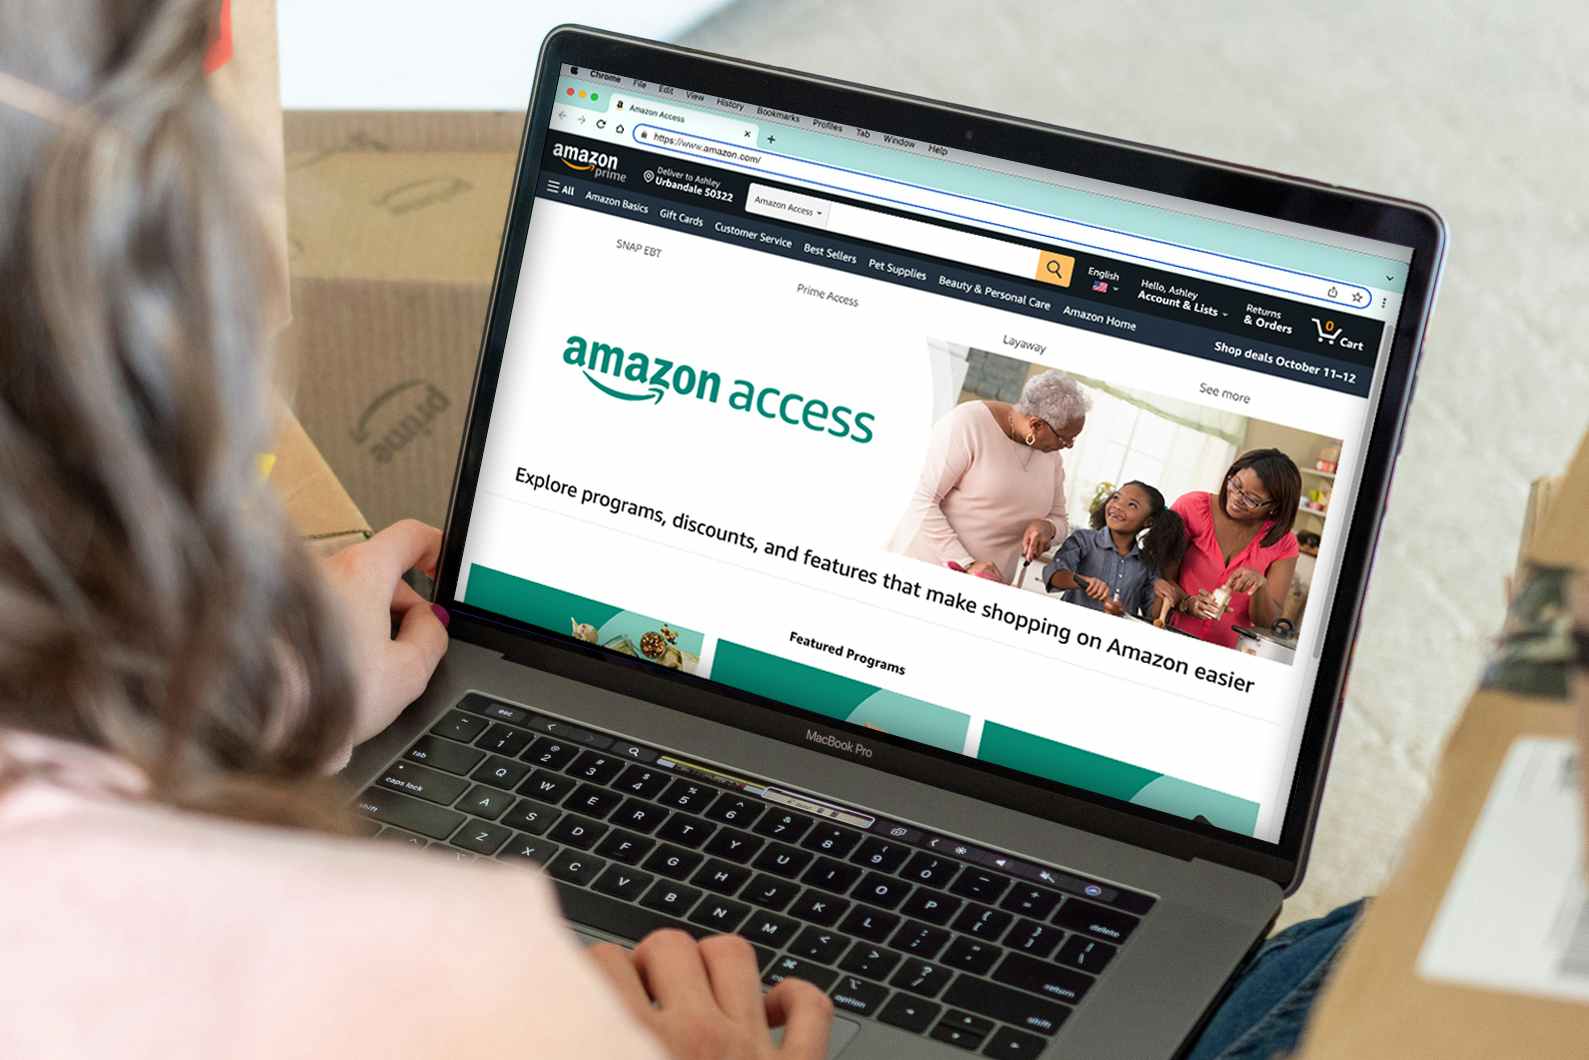 person on laptop looking at amazon access landing page